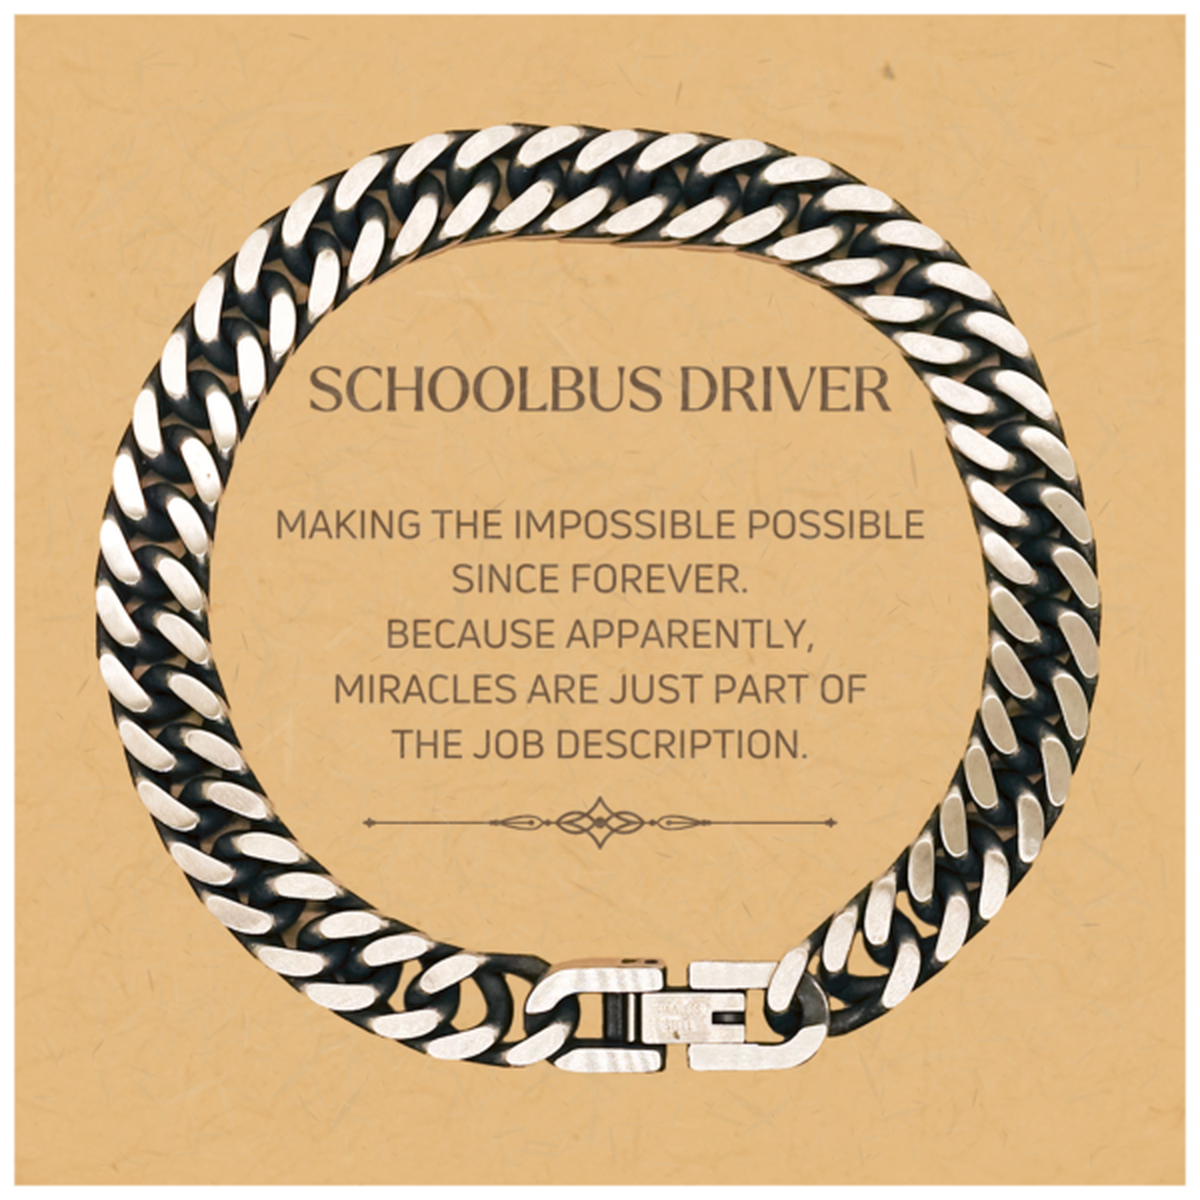 Funny Schoolbus Driver Gifts, Miracles are just part of the job description, Inspirational Birthday Christmas Cuban Link Chain Bracelet For Schoolbus Driver, Men, Women, Coworkers, Friends, Boss